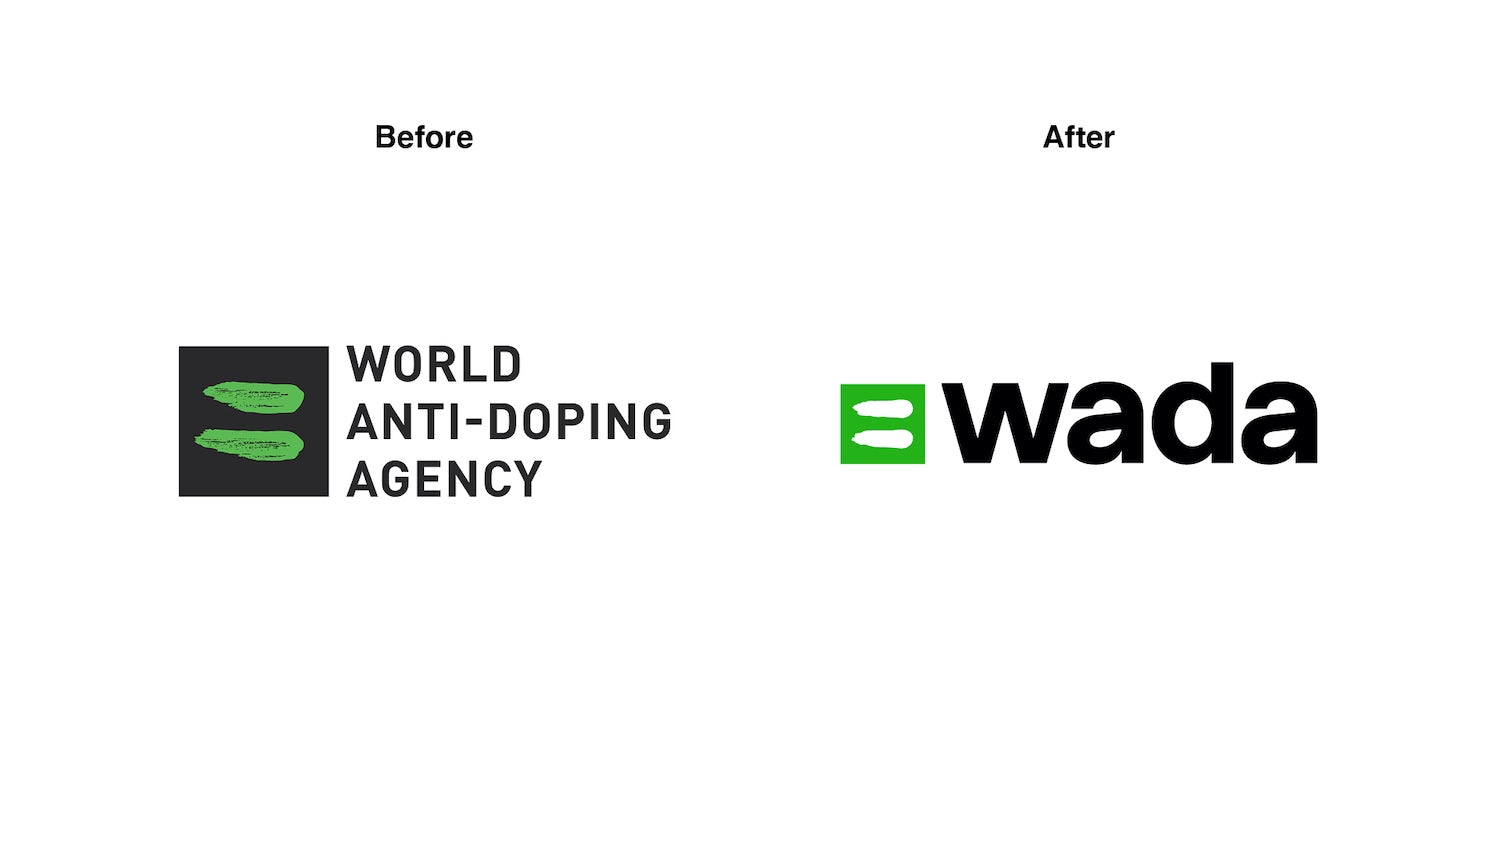 Cossette _ WADA (World Anti-Doping Agency) - Before and after